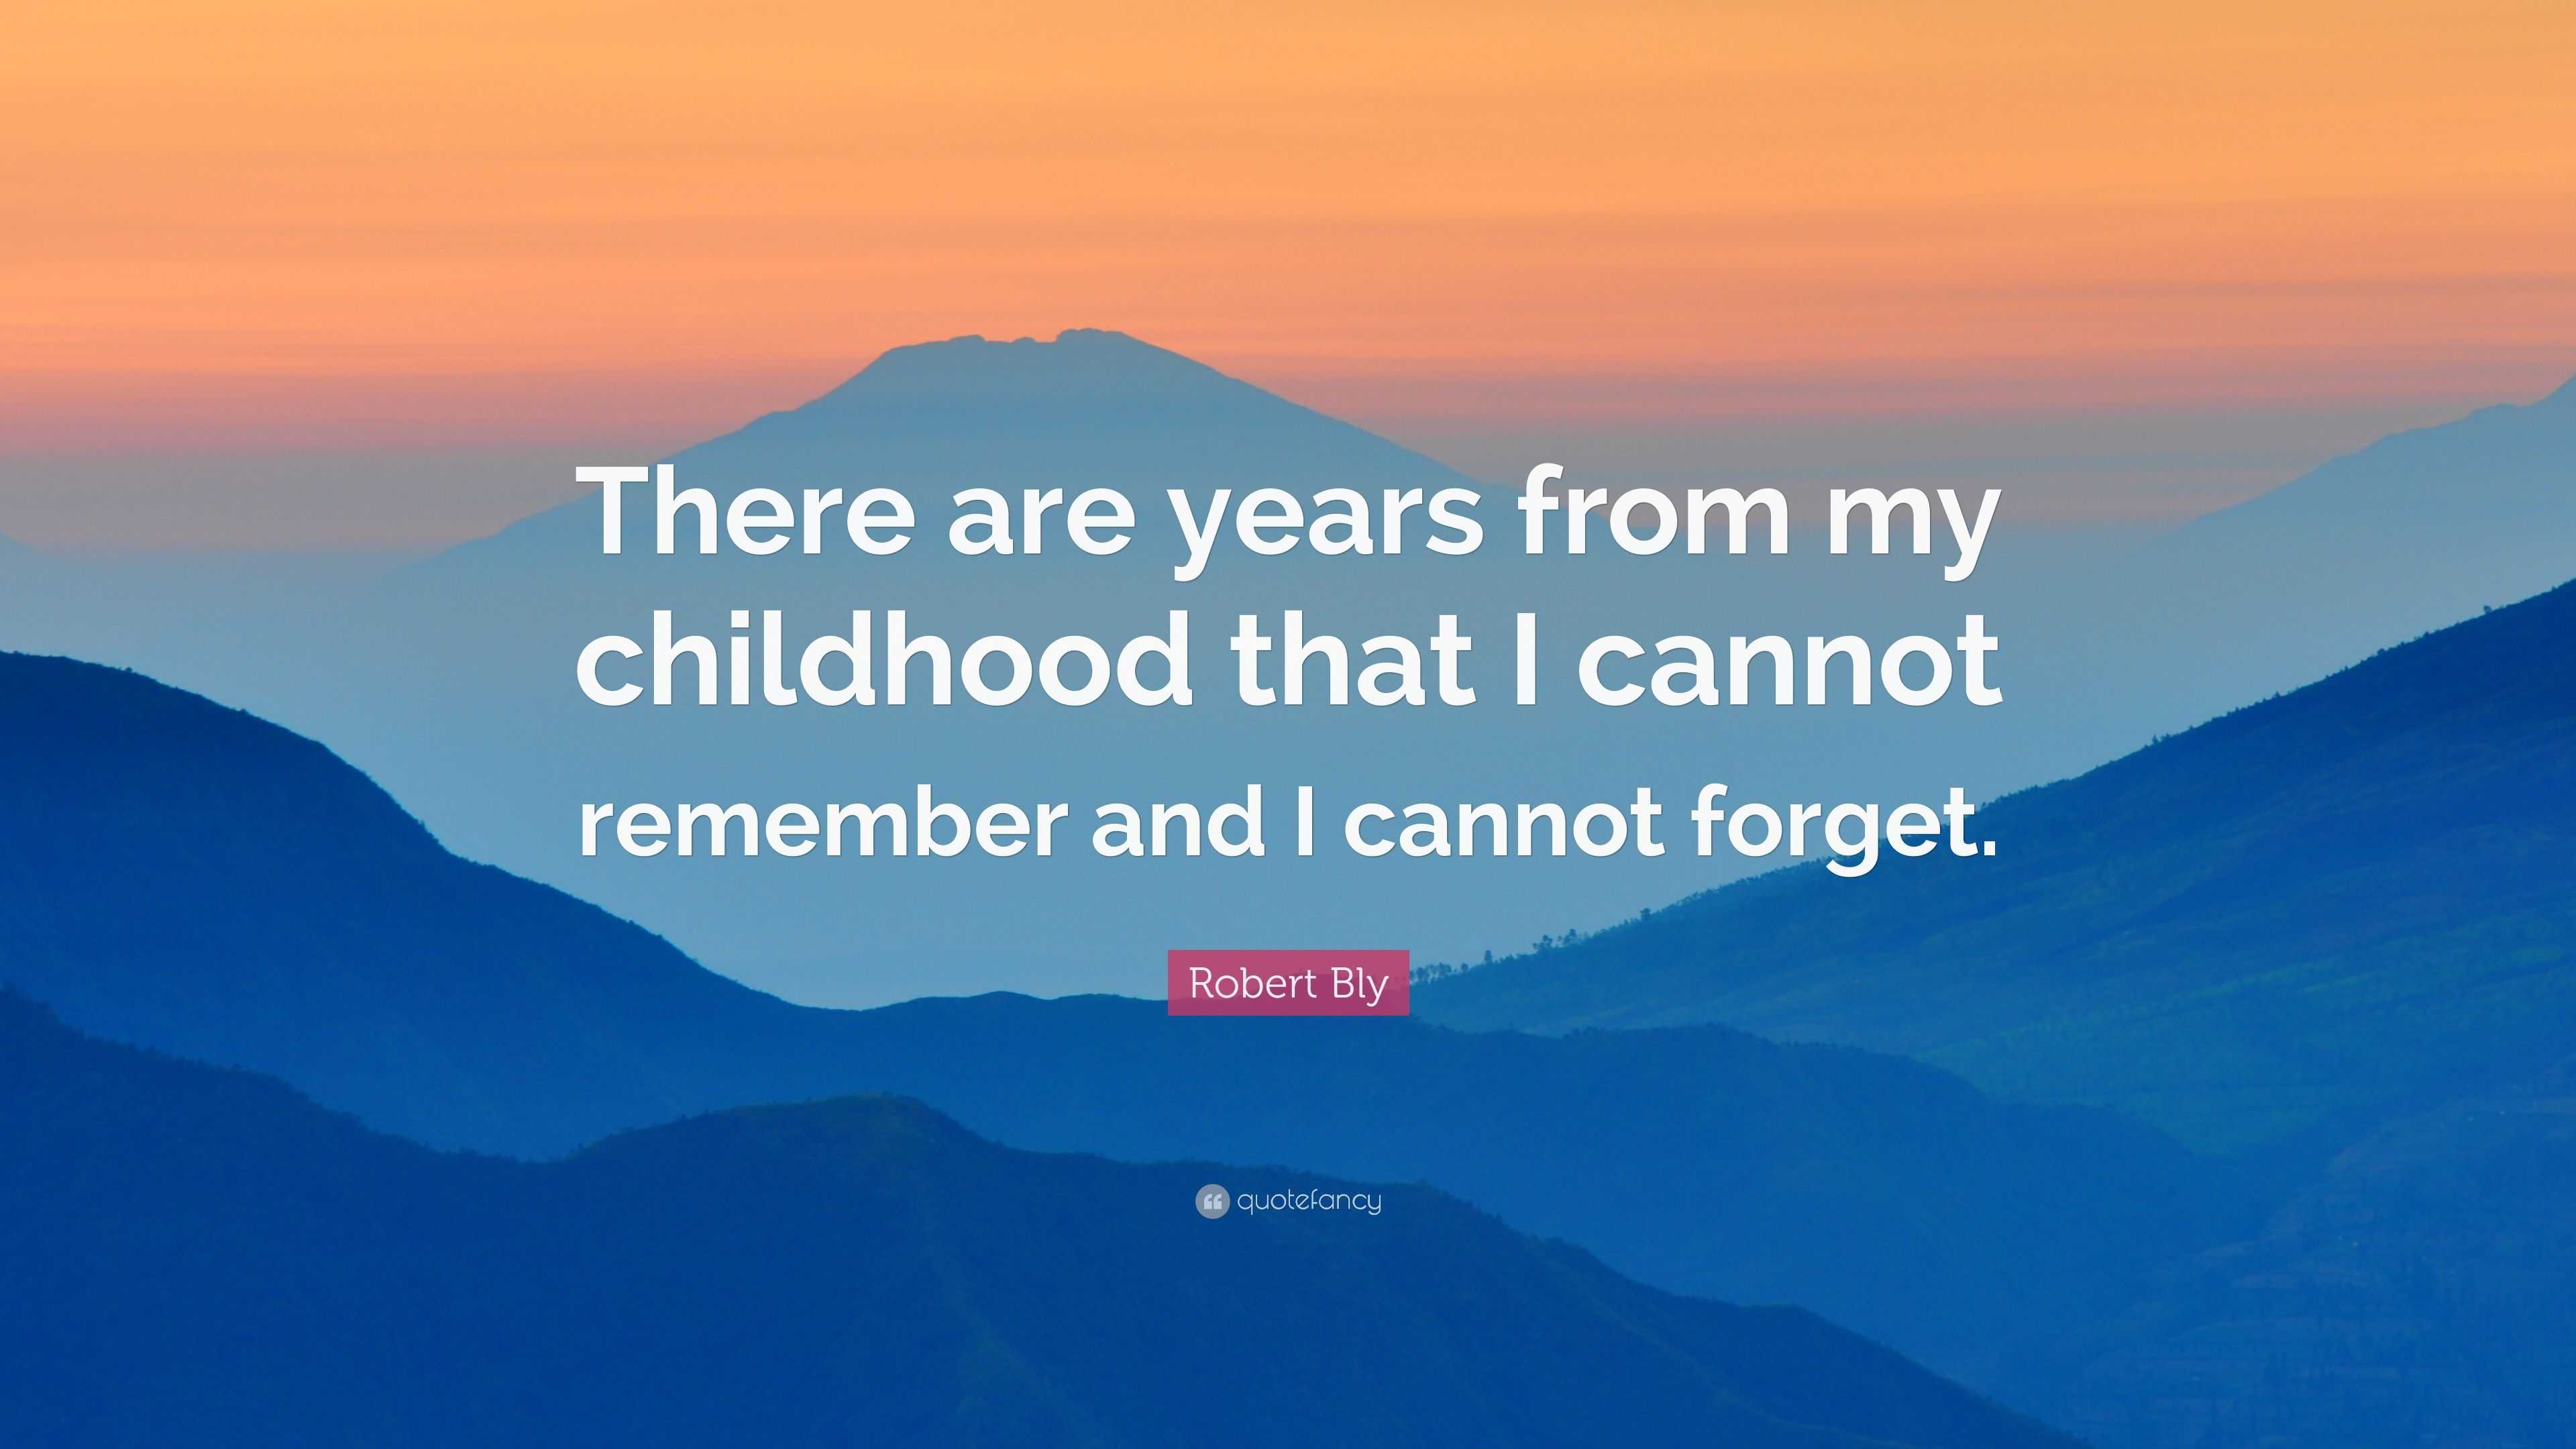 Robert Bly Quote: “There are years from my childhood that I cannot ...